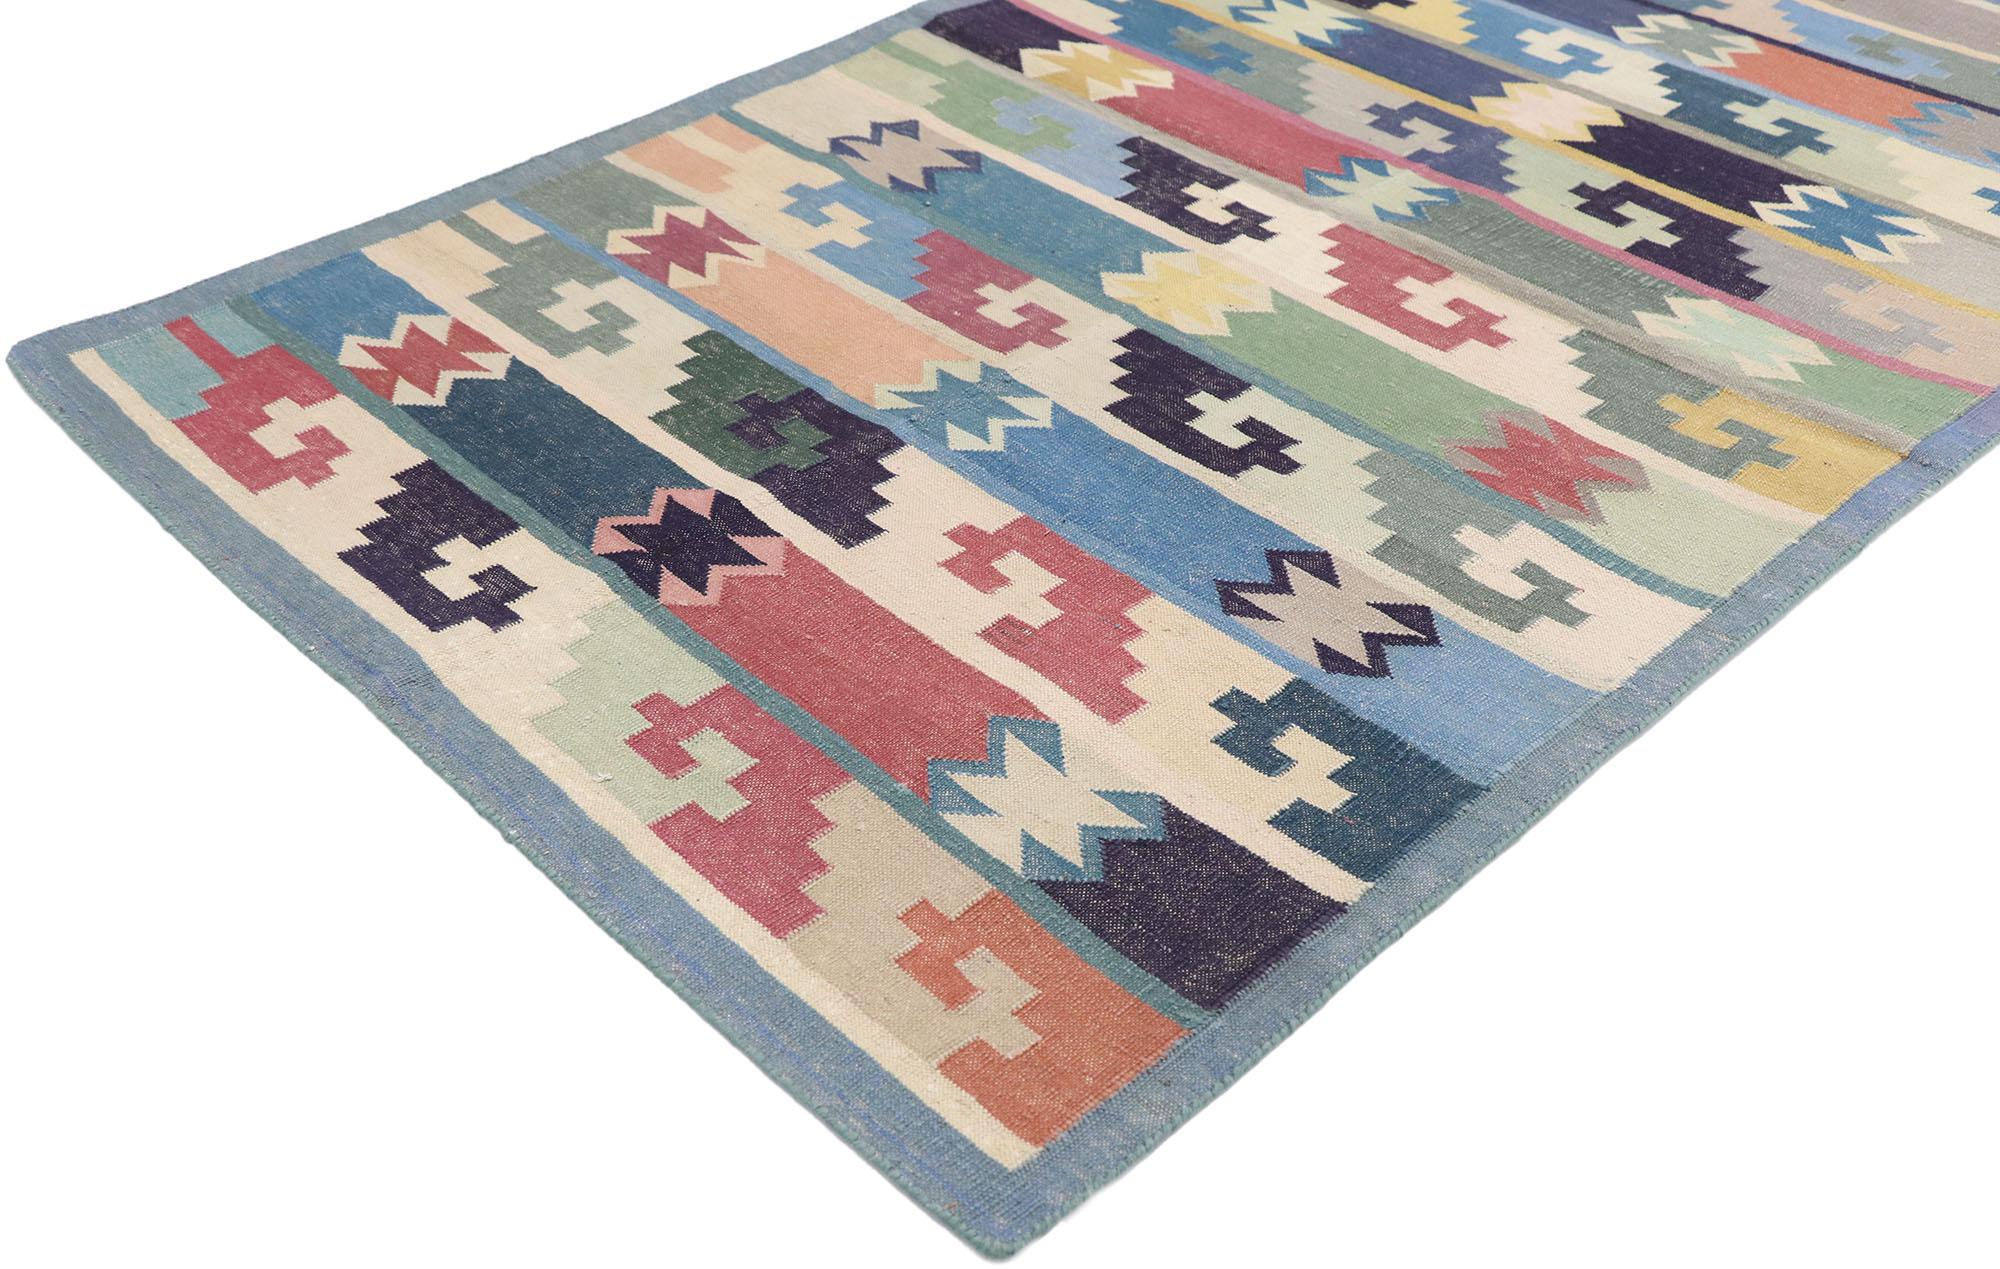 77834 Vintage Persian Shiraz rug with Boho Chic Tribal style 03'00 x 04'11. Full of tiny details and a bold expressive design combined with a kaleidoscope of colors and tribal style, this hand-woven wool vintage Persian Shiraz kilim rug is a